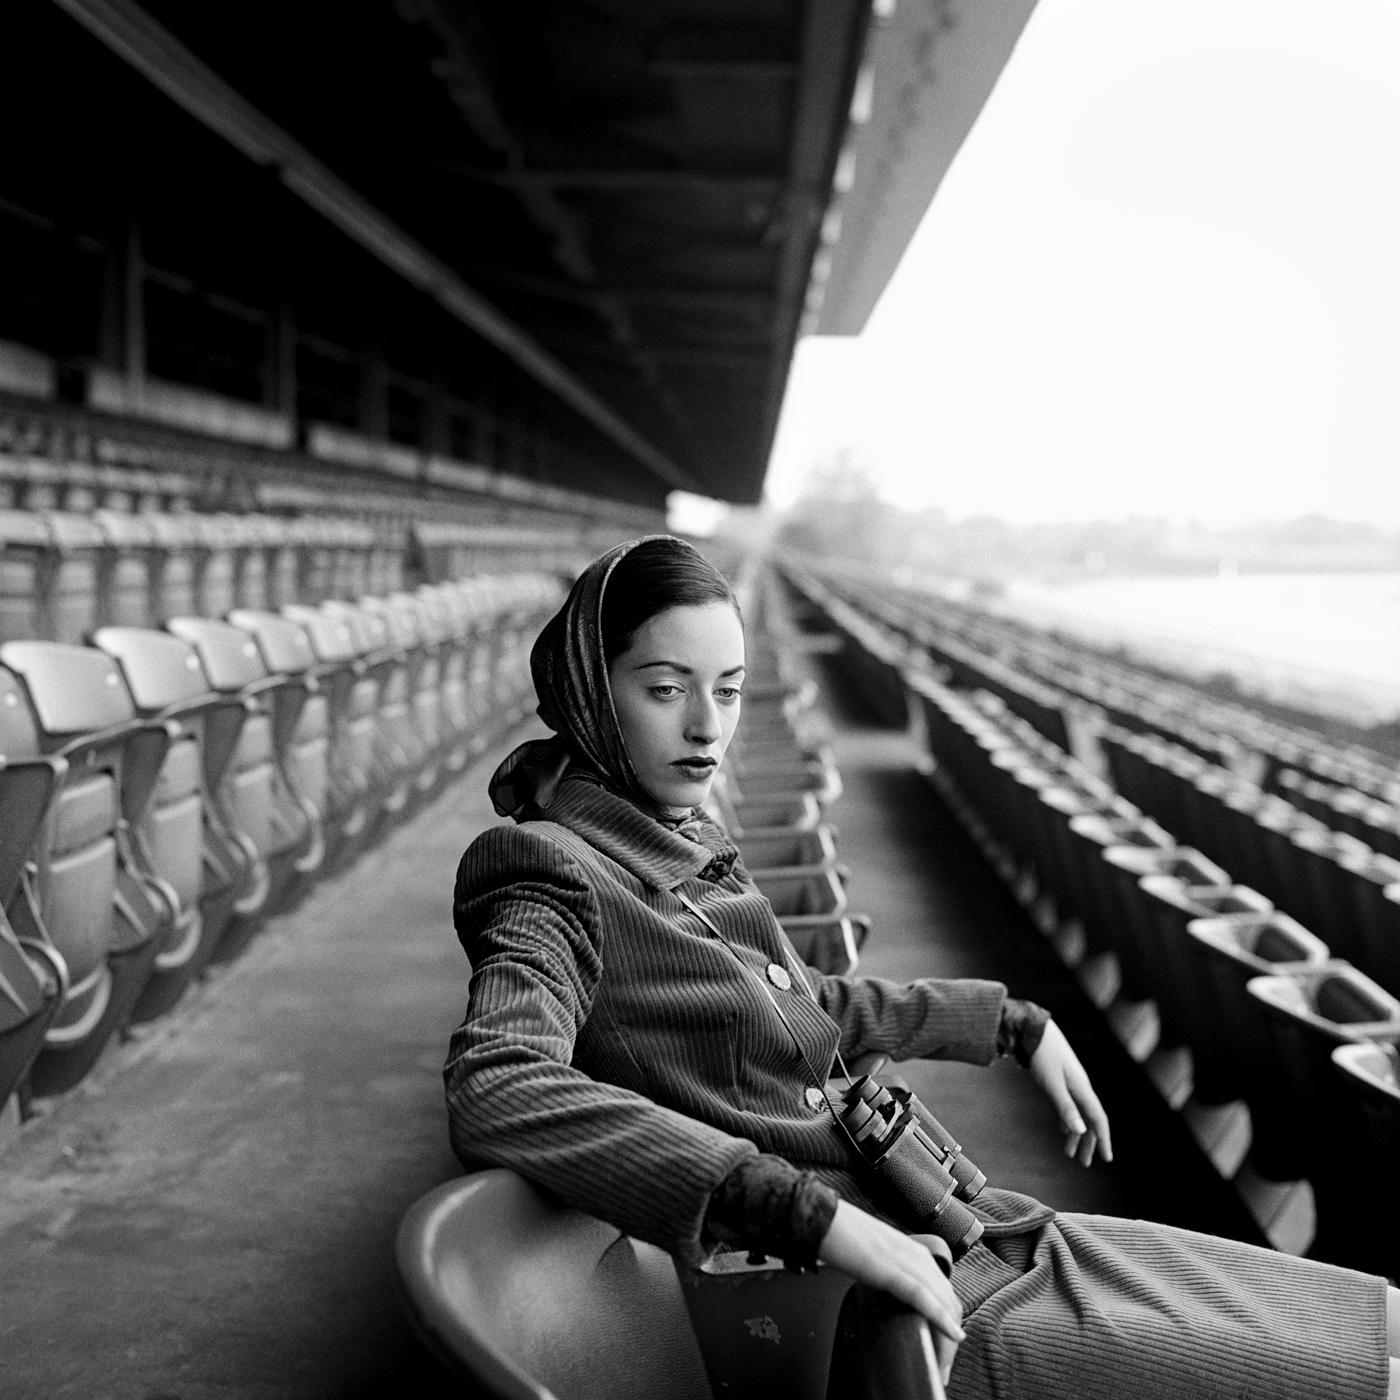 Rodney Smith Figurative Photograph - Shirley seated in grandstand, Long Island, New York - 20 x 20 inches